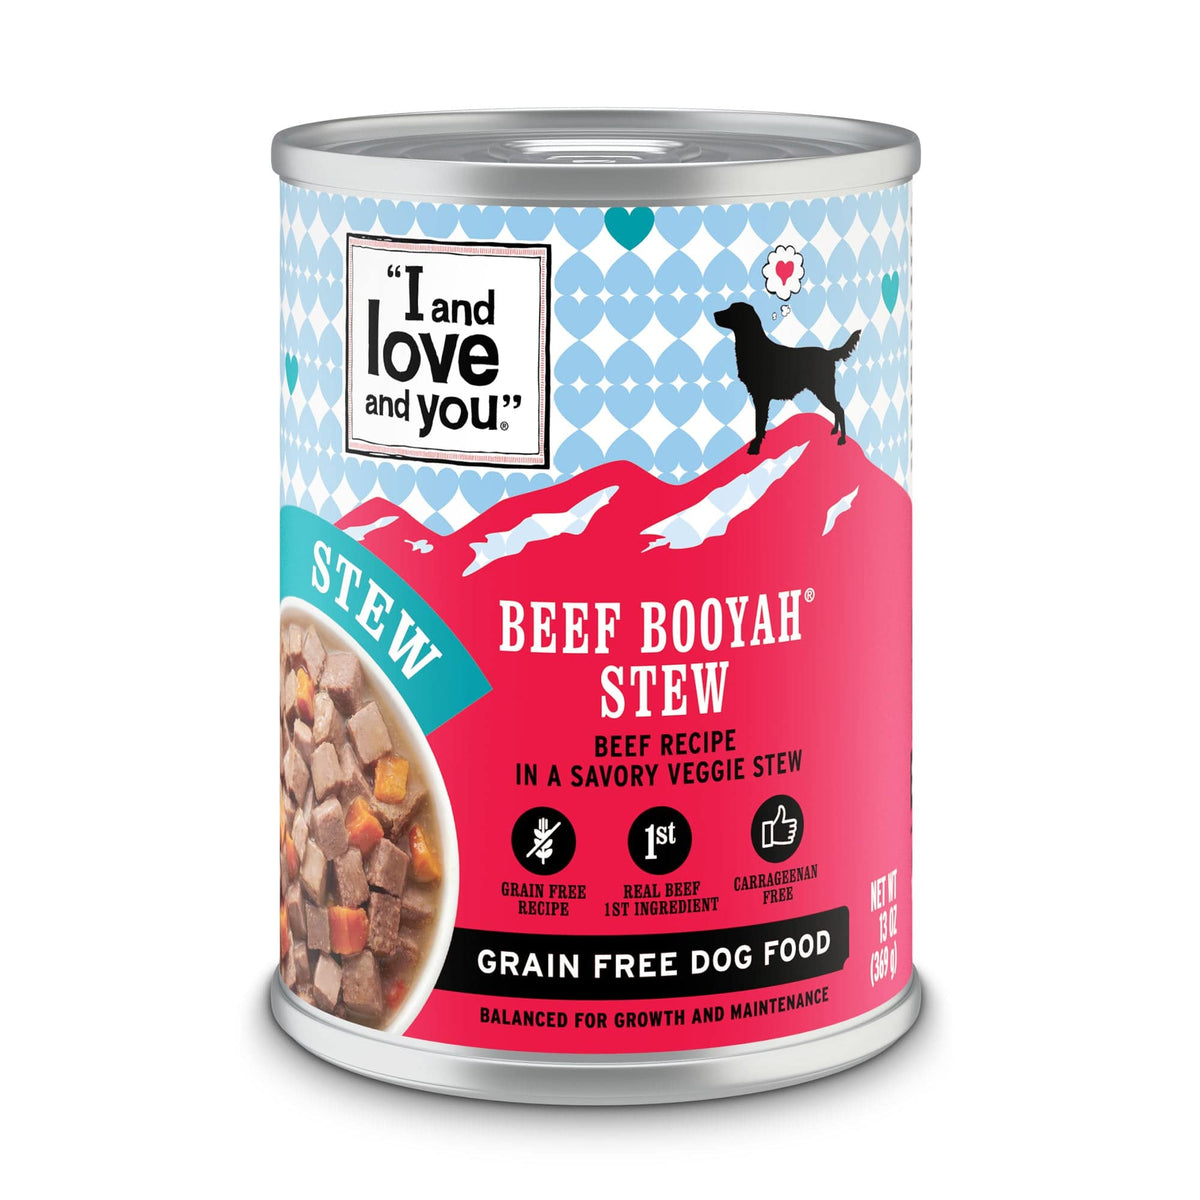 A can of Beef Booyah Stew dog food with label and sign close-ups.